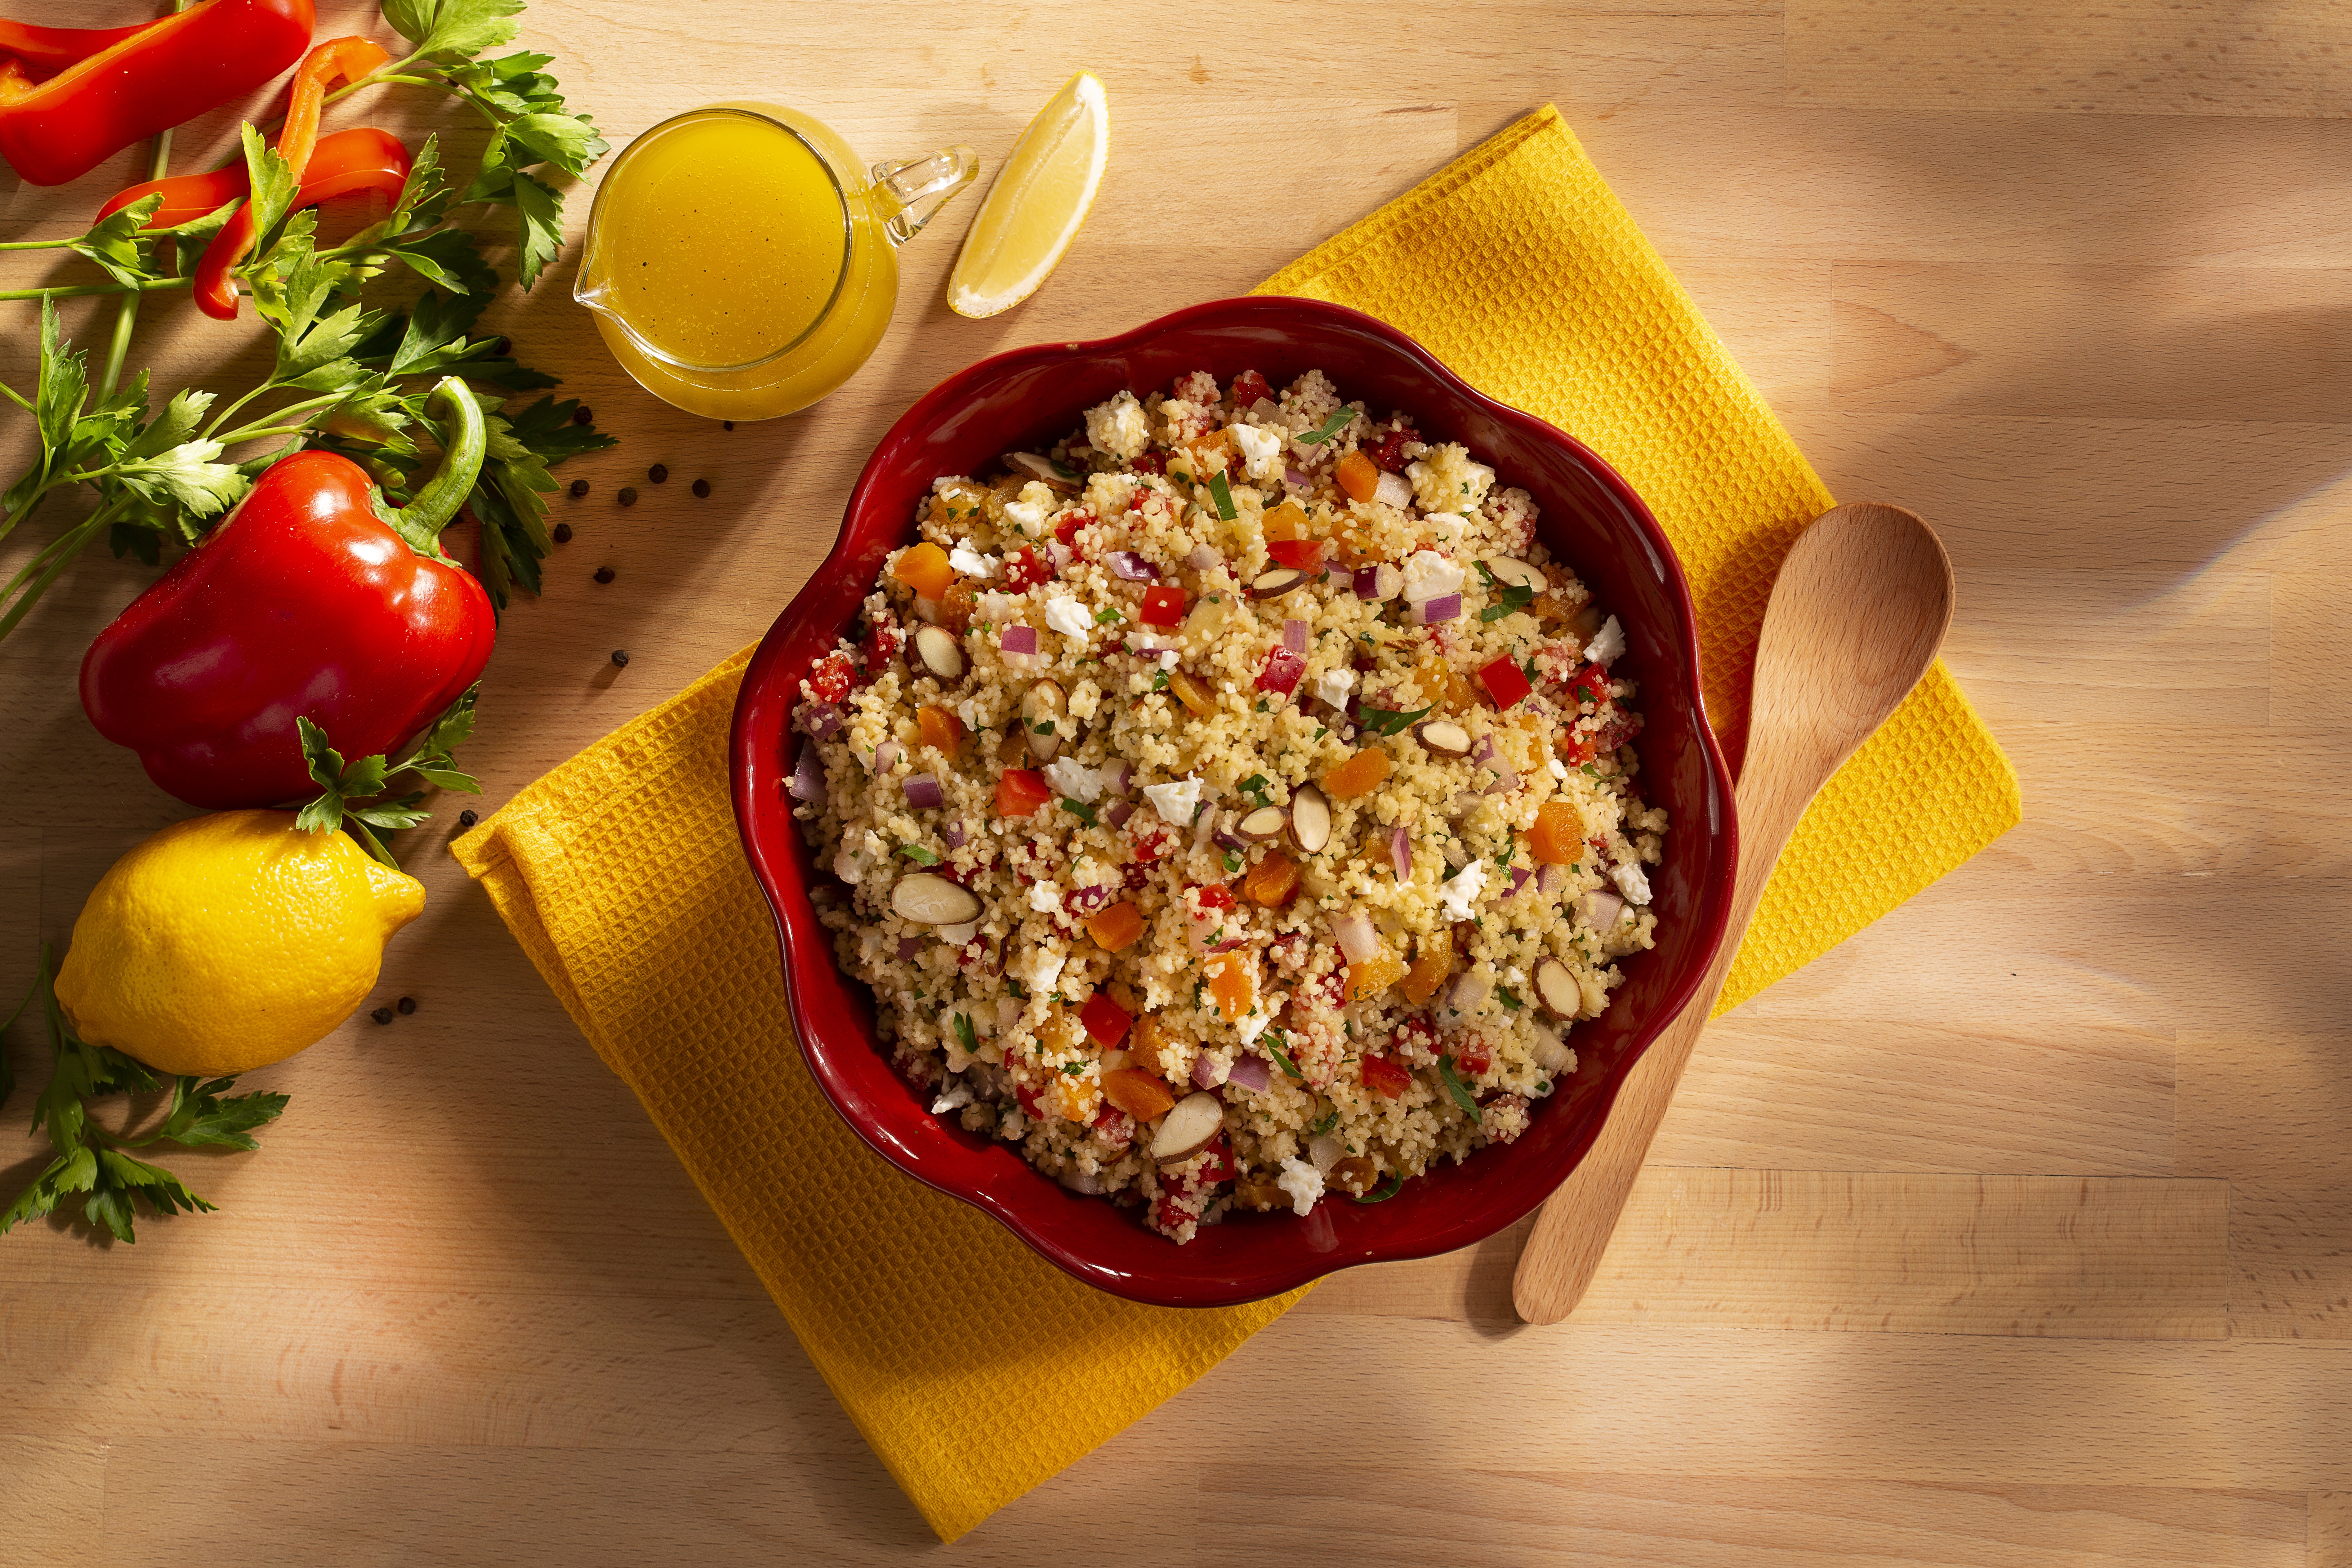 A red bowl full of couscous salad